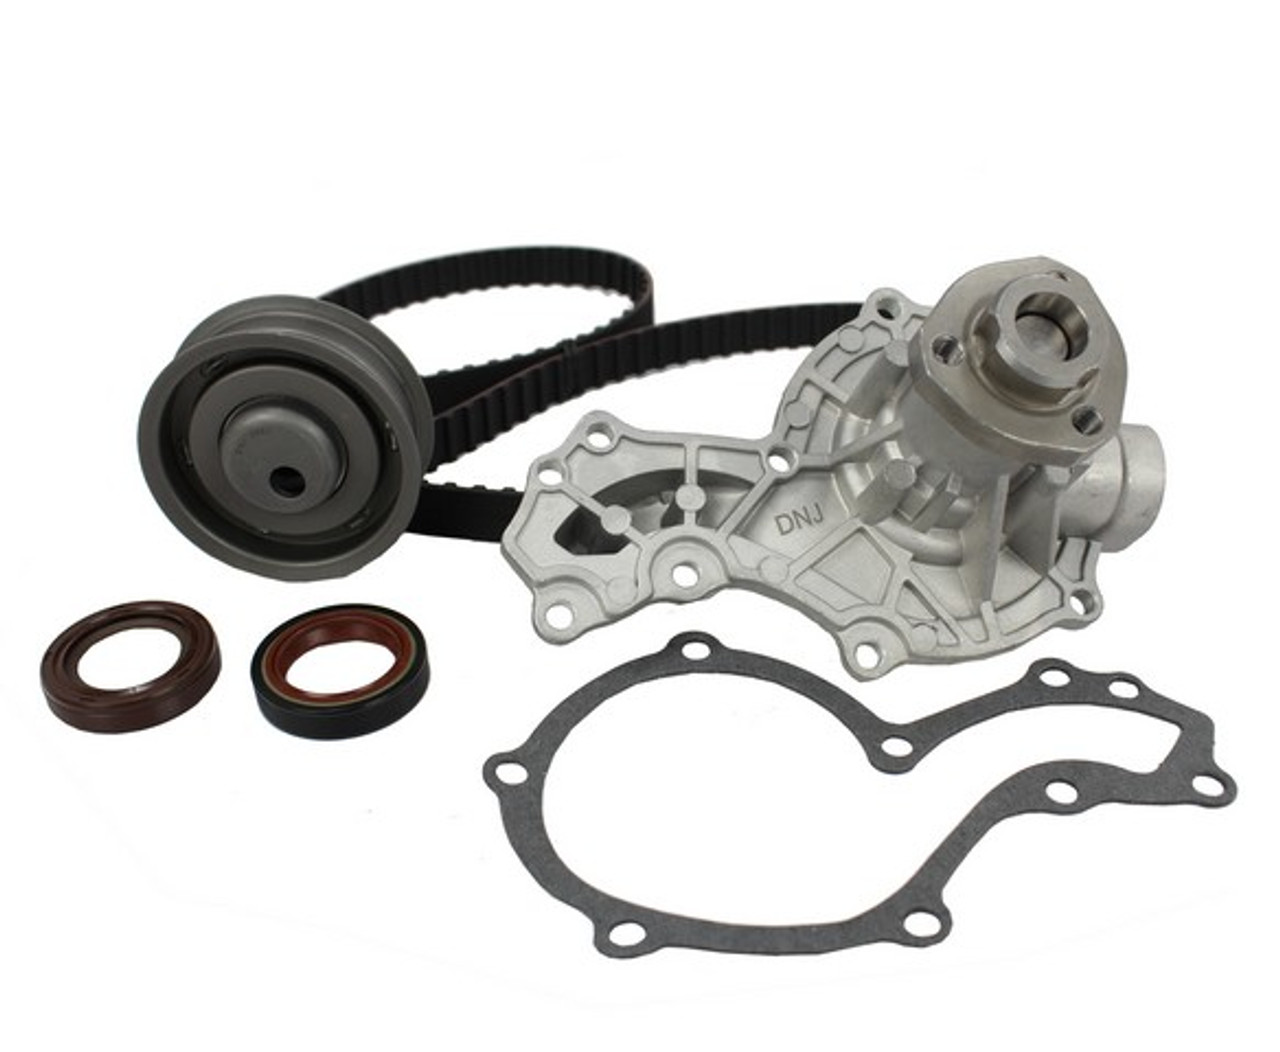 Timing Belt Kit with Water Pump 2.0L 1997 Volkswagen Golf - TBK803WP.13